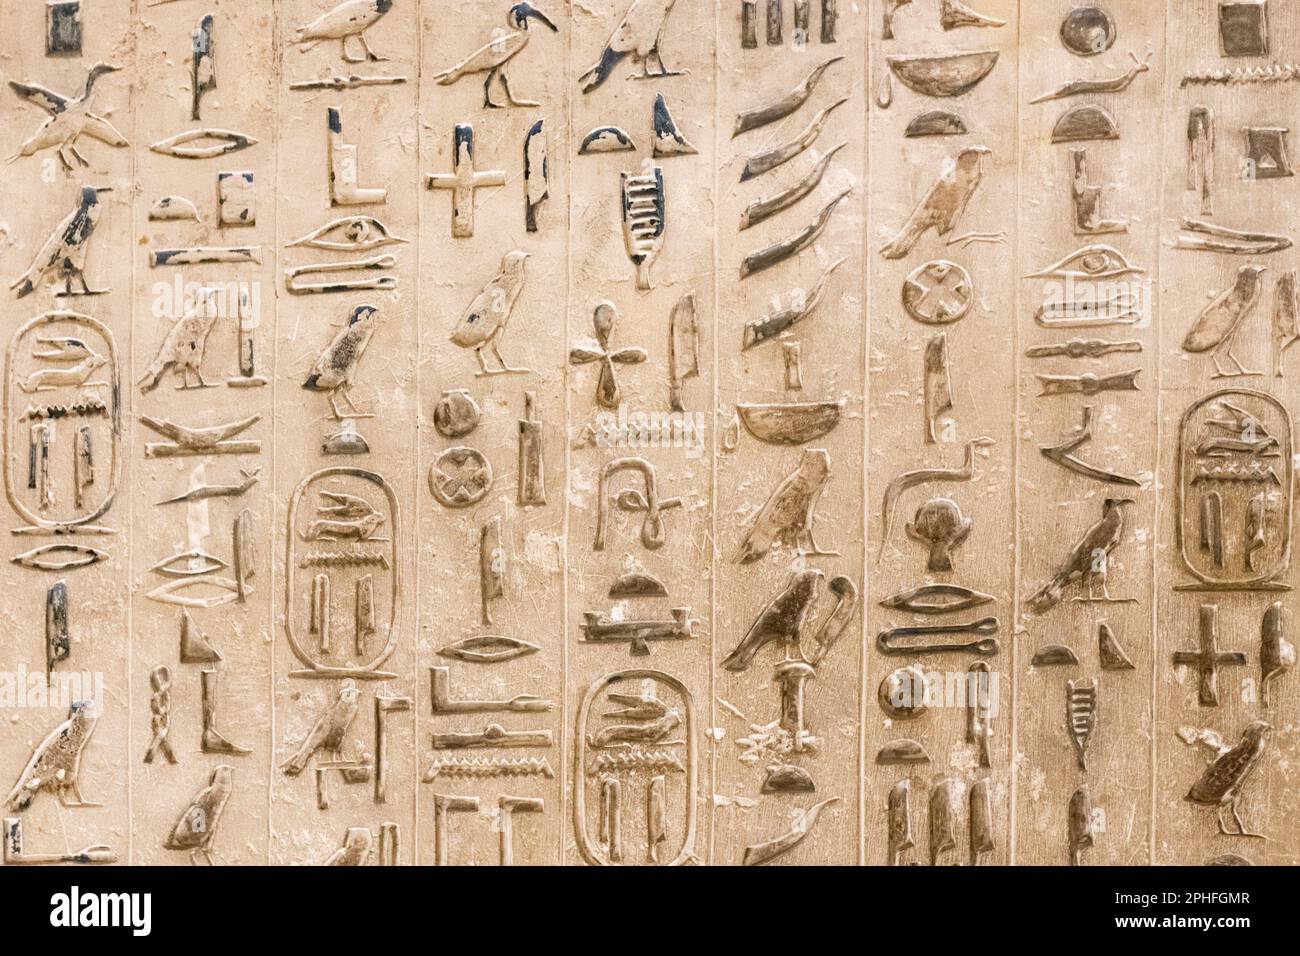 Authentic hieroglyphic inscriptions inside an underground burial chamber by the Pyramid of Djoser at the Saqqara Necropolis in Giza, Egypt Stock Photo